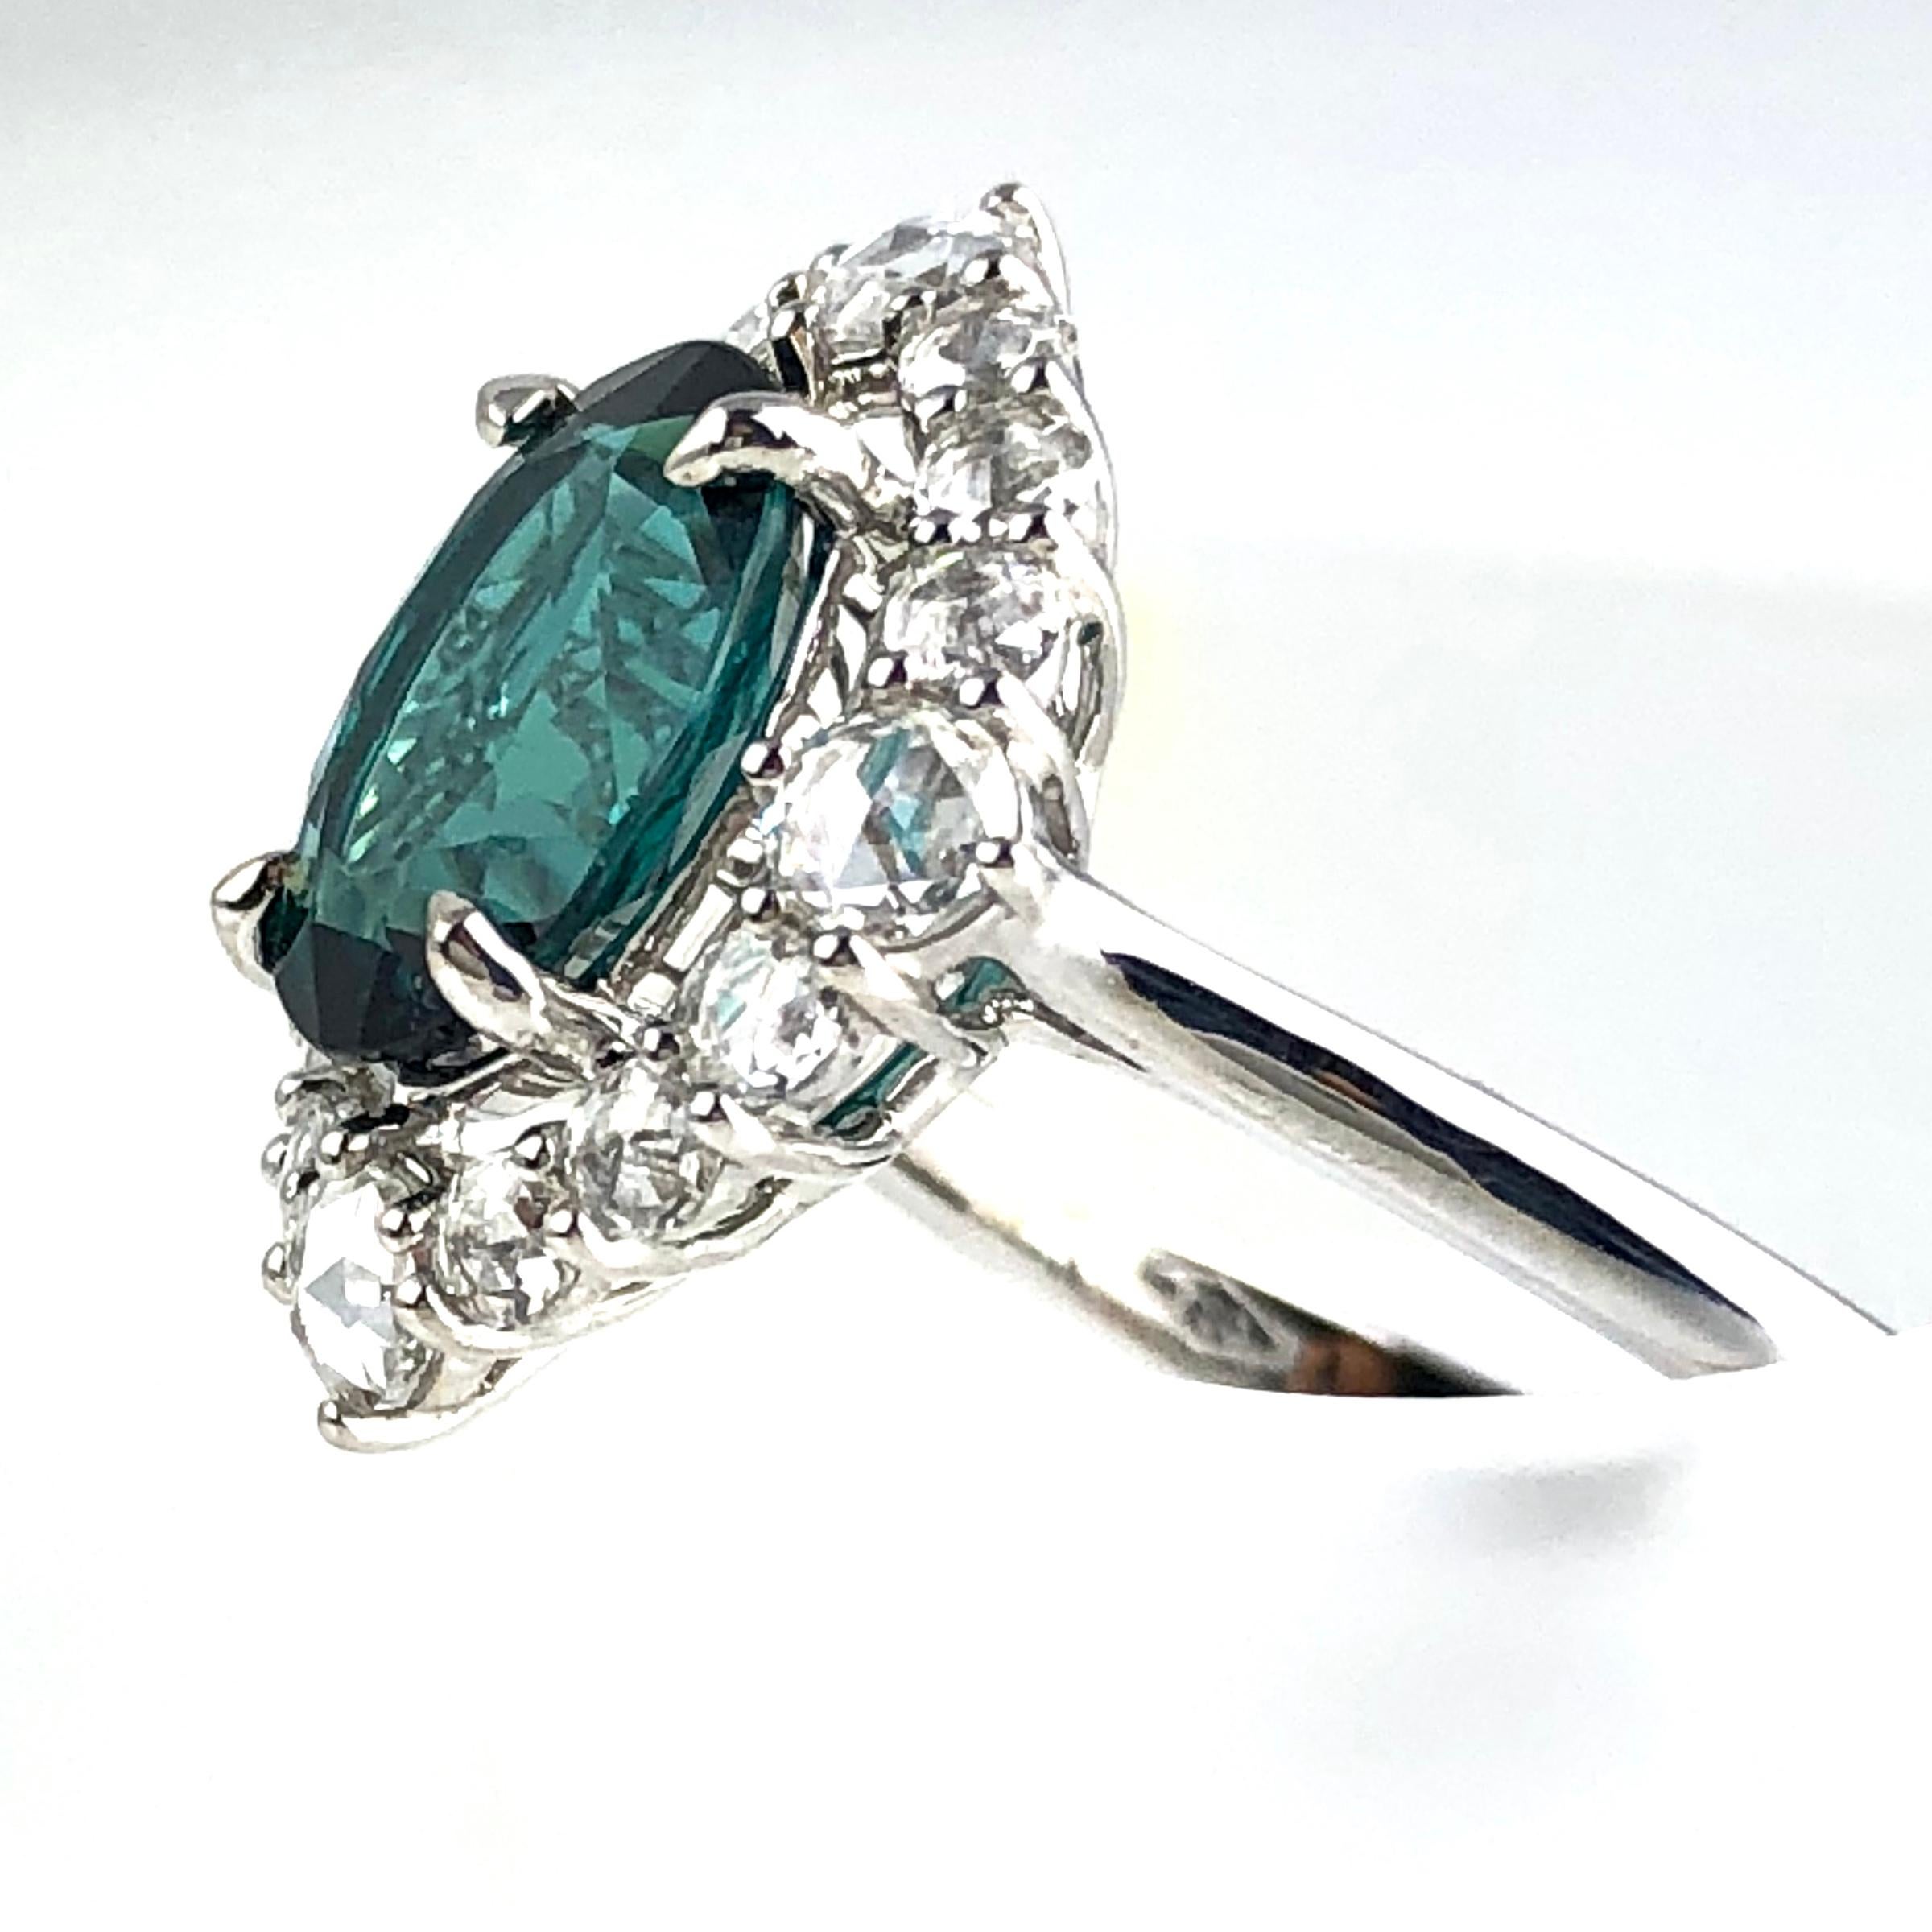 (DiamondTown) With a GIA Certified 1.81 carat oval cut blue-green Tourmaline center, and 0.62 carats white diamonds, this ring shines from every angle. 

GIA Certification details (see photo):
The center tourmaline is Transparent,